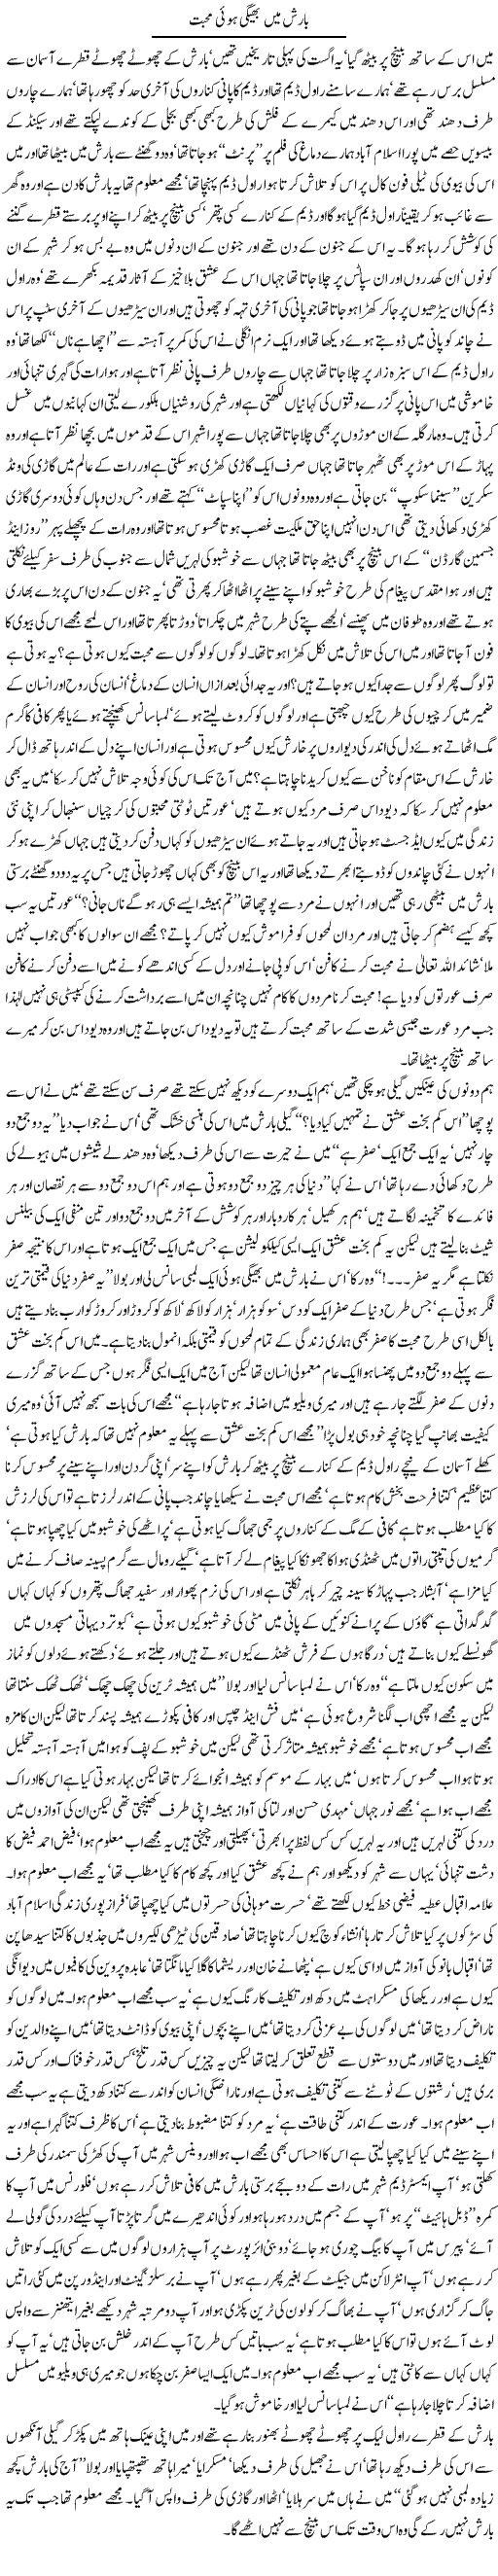 Barish Mohabaat Express Column Javed Chaudhry 8 August 2010